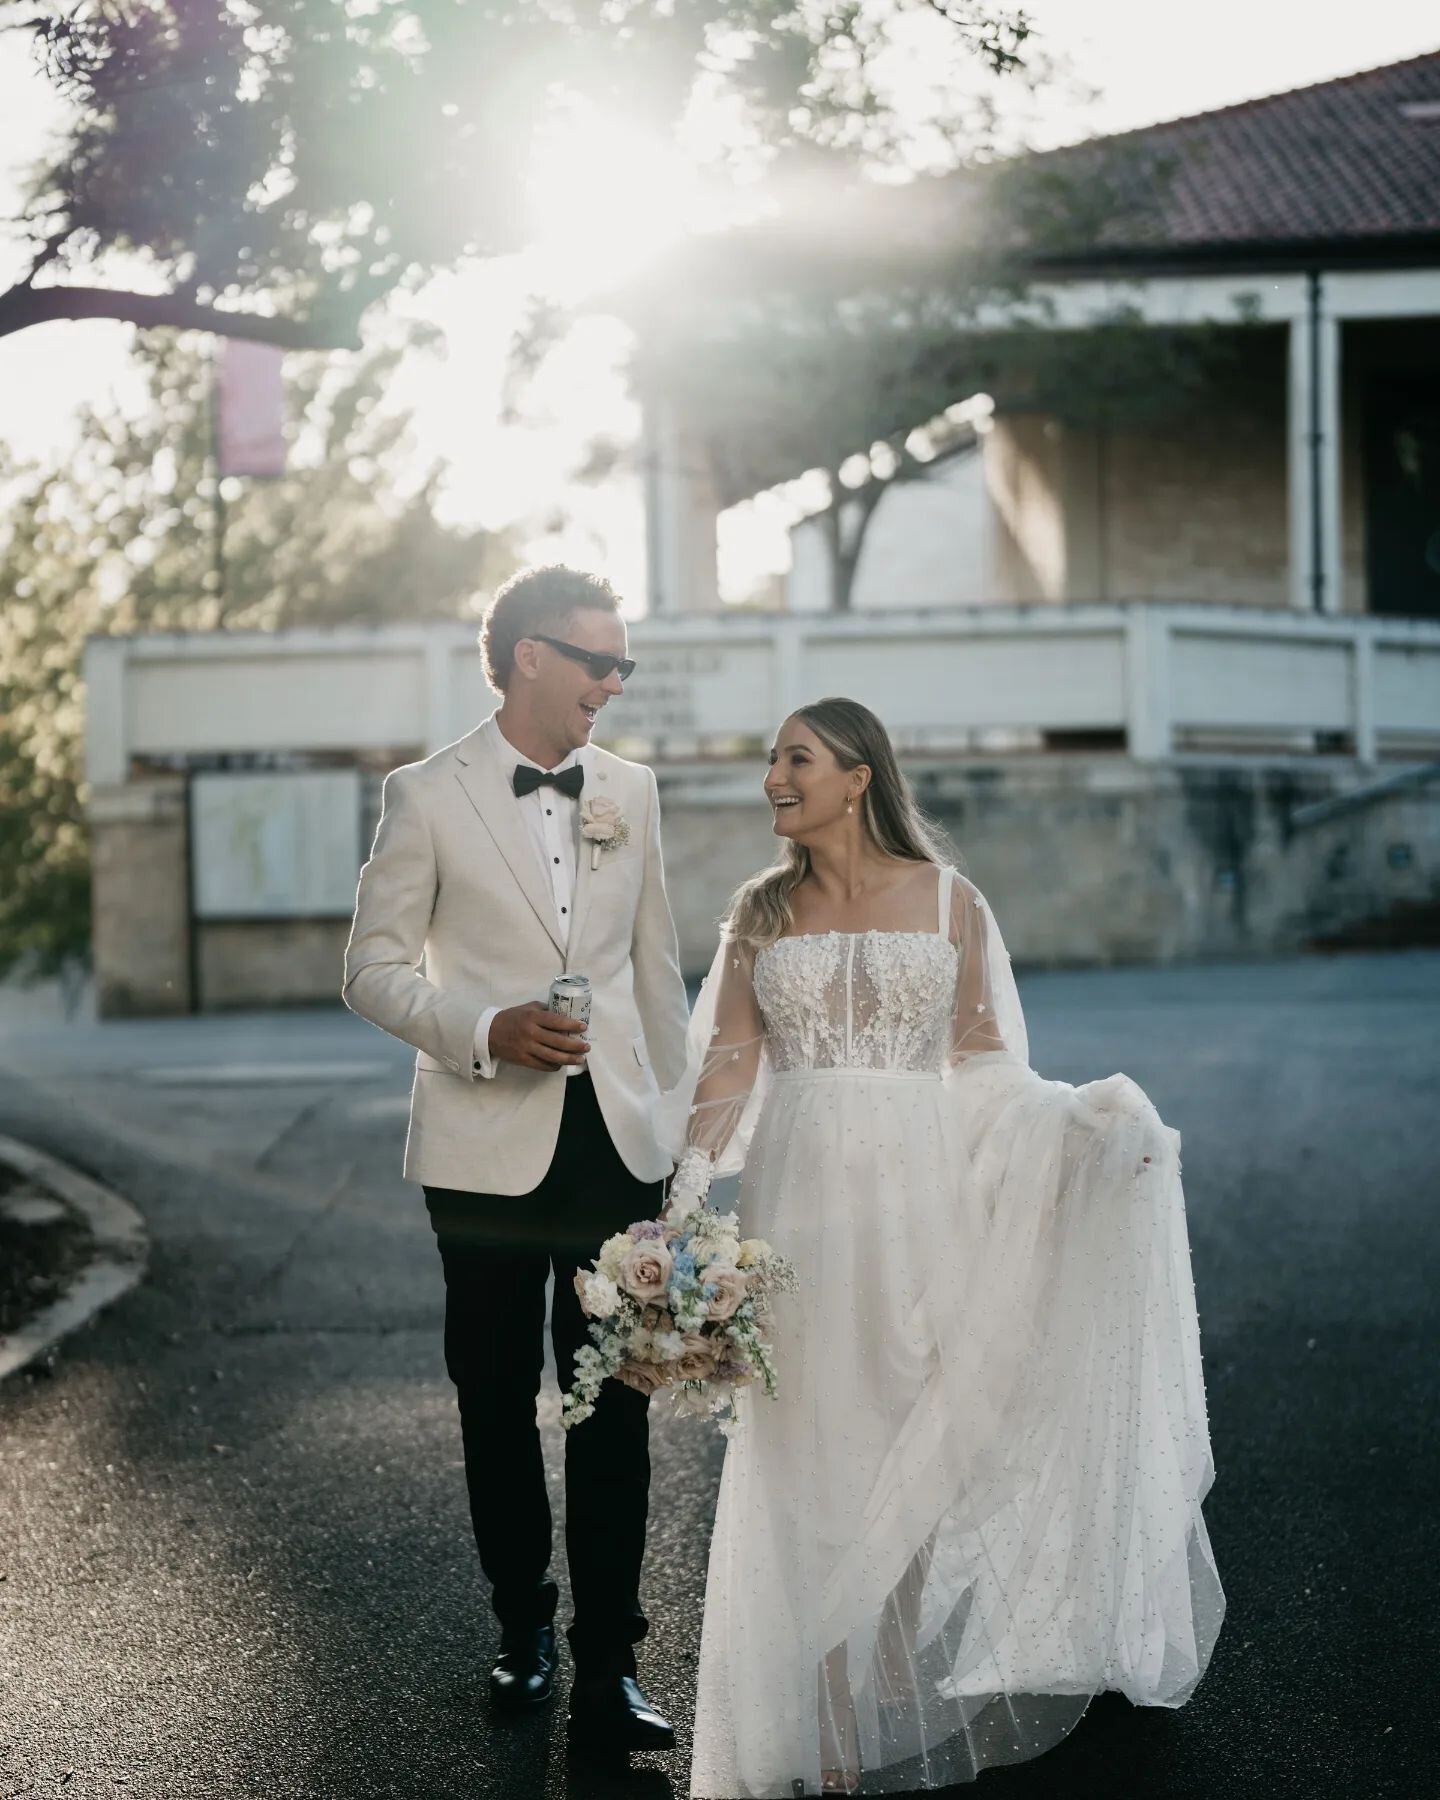 The newlyweds Sharnee and Joe living a real life fairytale 😍☁️🌸

Happy Friday to all the Lovers 🤍🤍🤍

📷 @oliverhorn

#perth #perthcreative #perthluxury #perthisok #perthgirlboss #perthmum #perthsmallbusiness
#weloveperth #perthstagram #theperthc